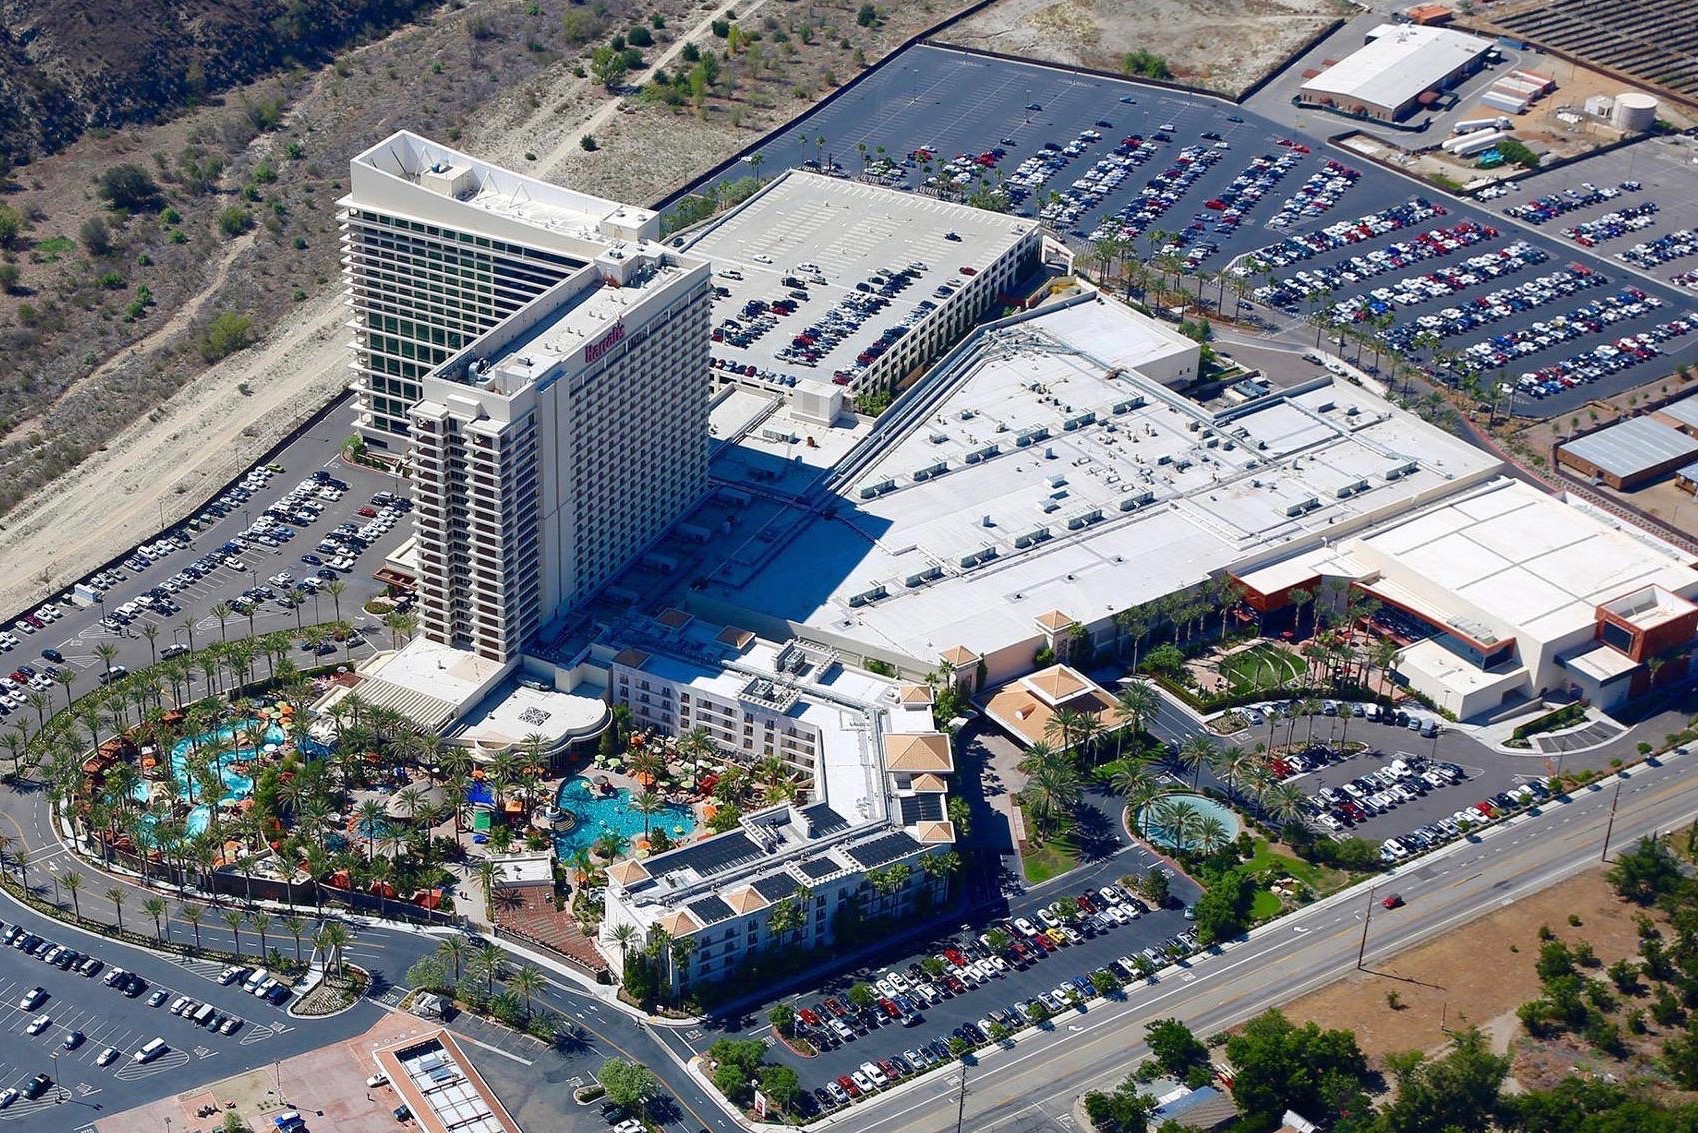 Rincon Band offers more amenities with $14M casino expansion